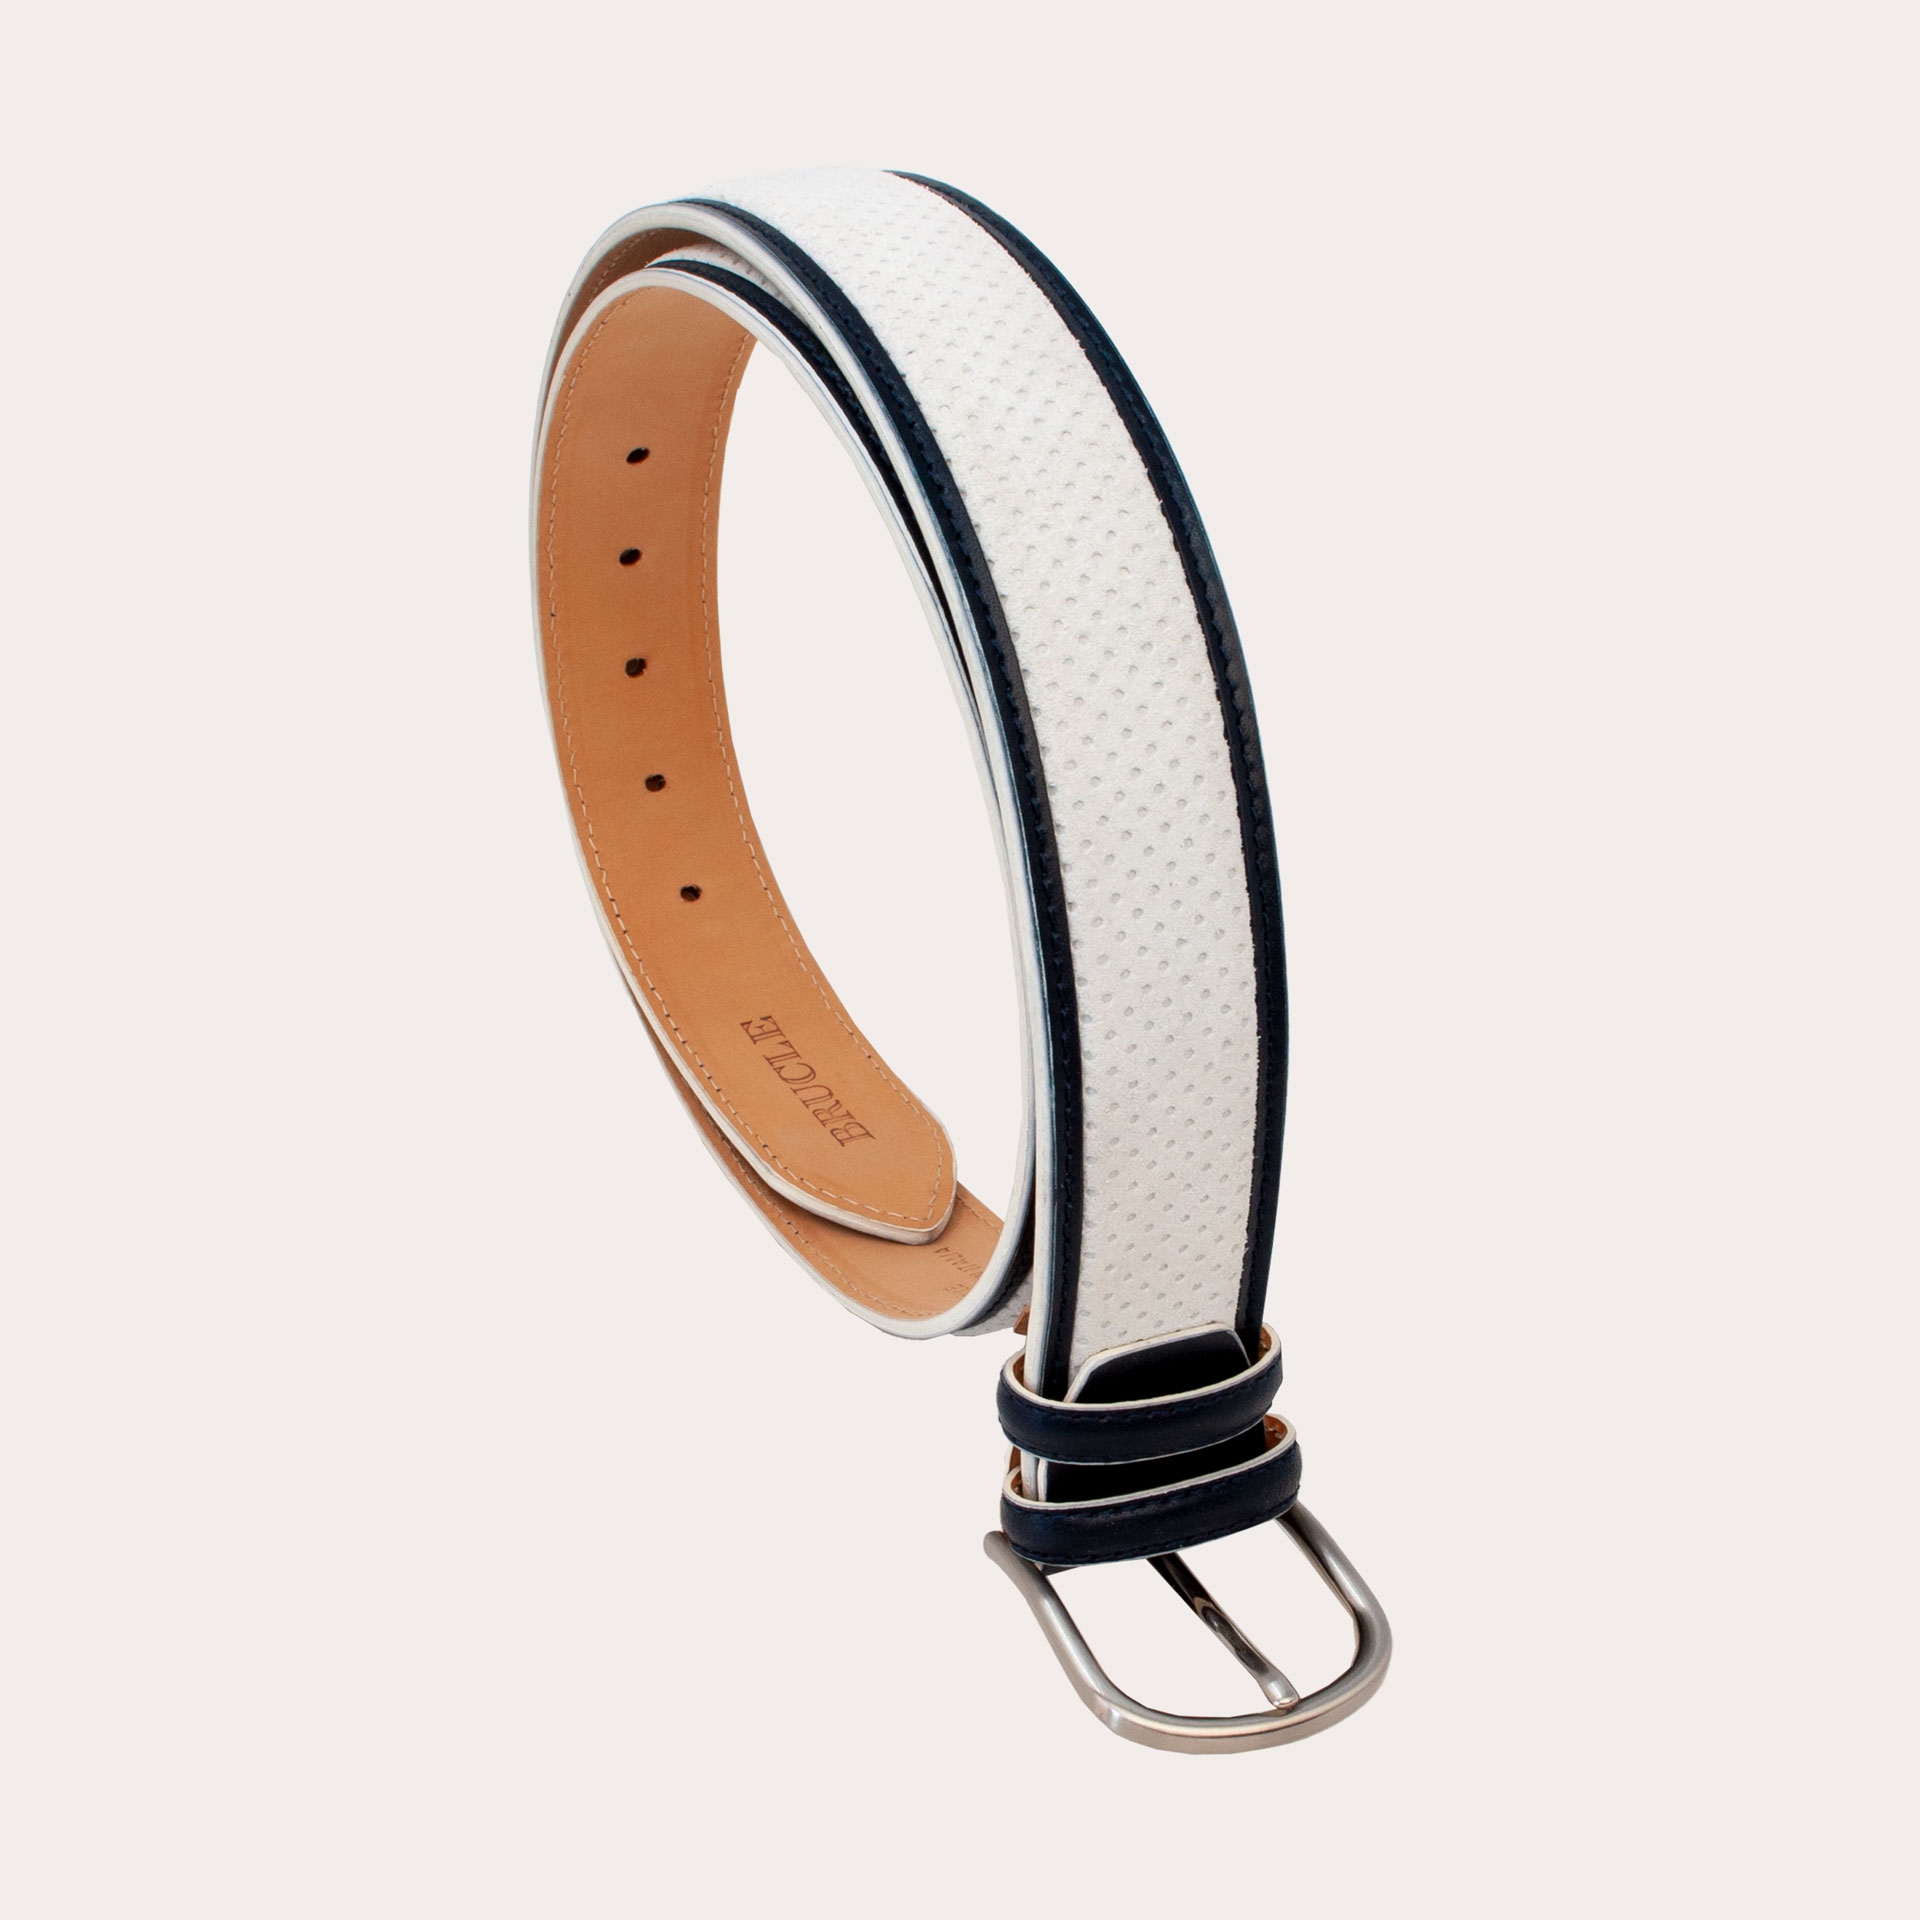 BRUCLE Perforated Suede Belt with Leather Edge | Men's Fashion